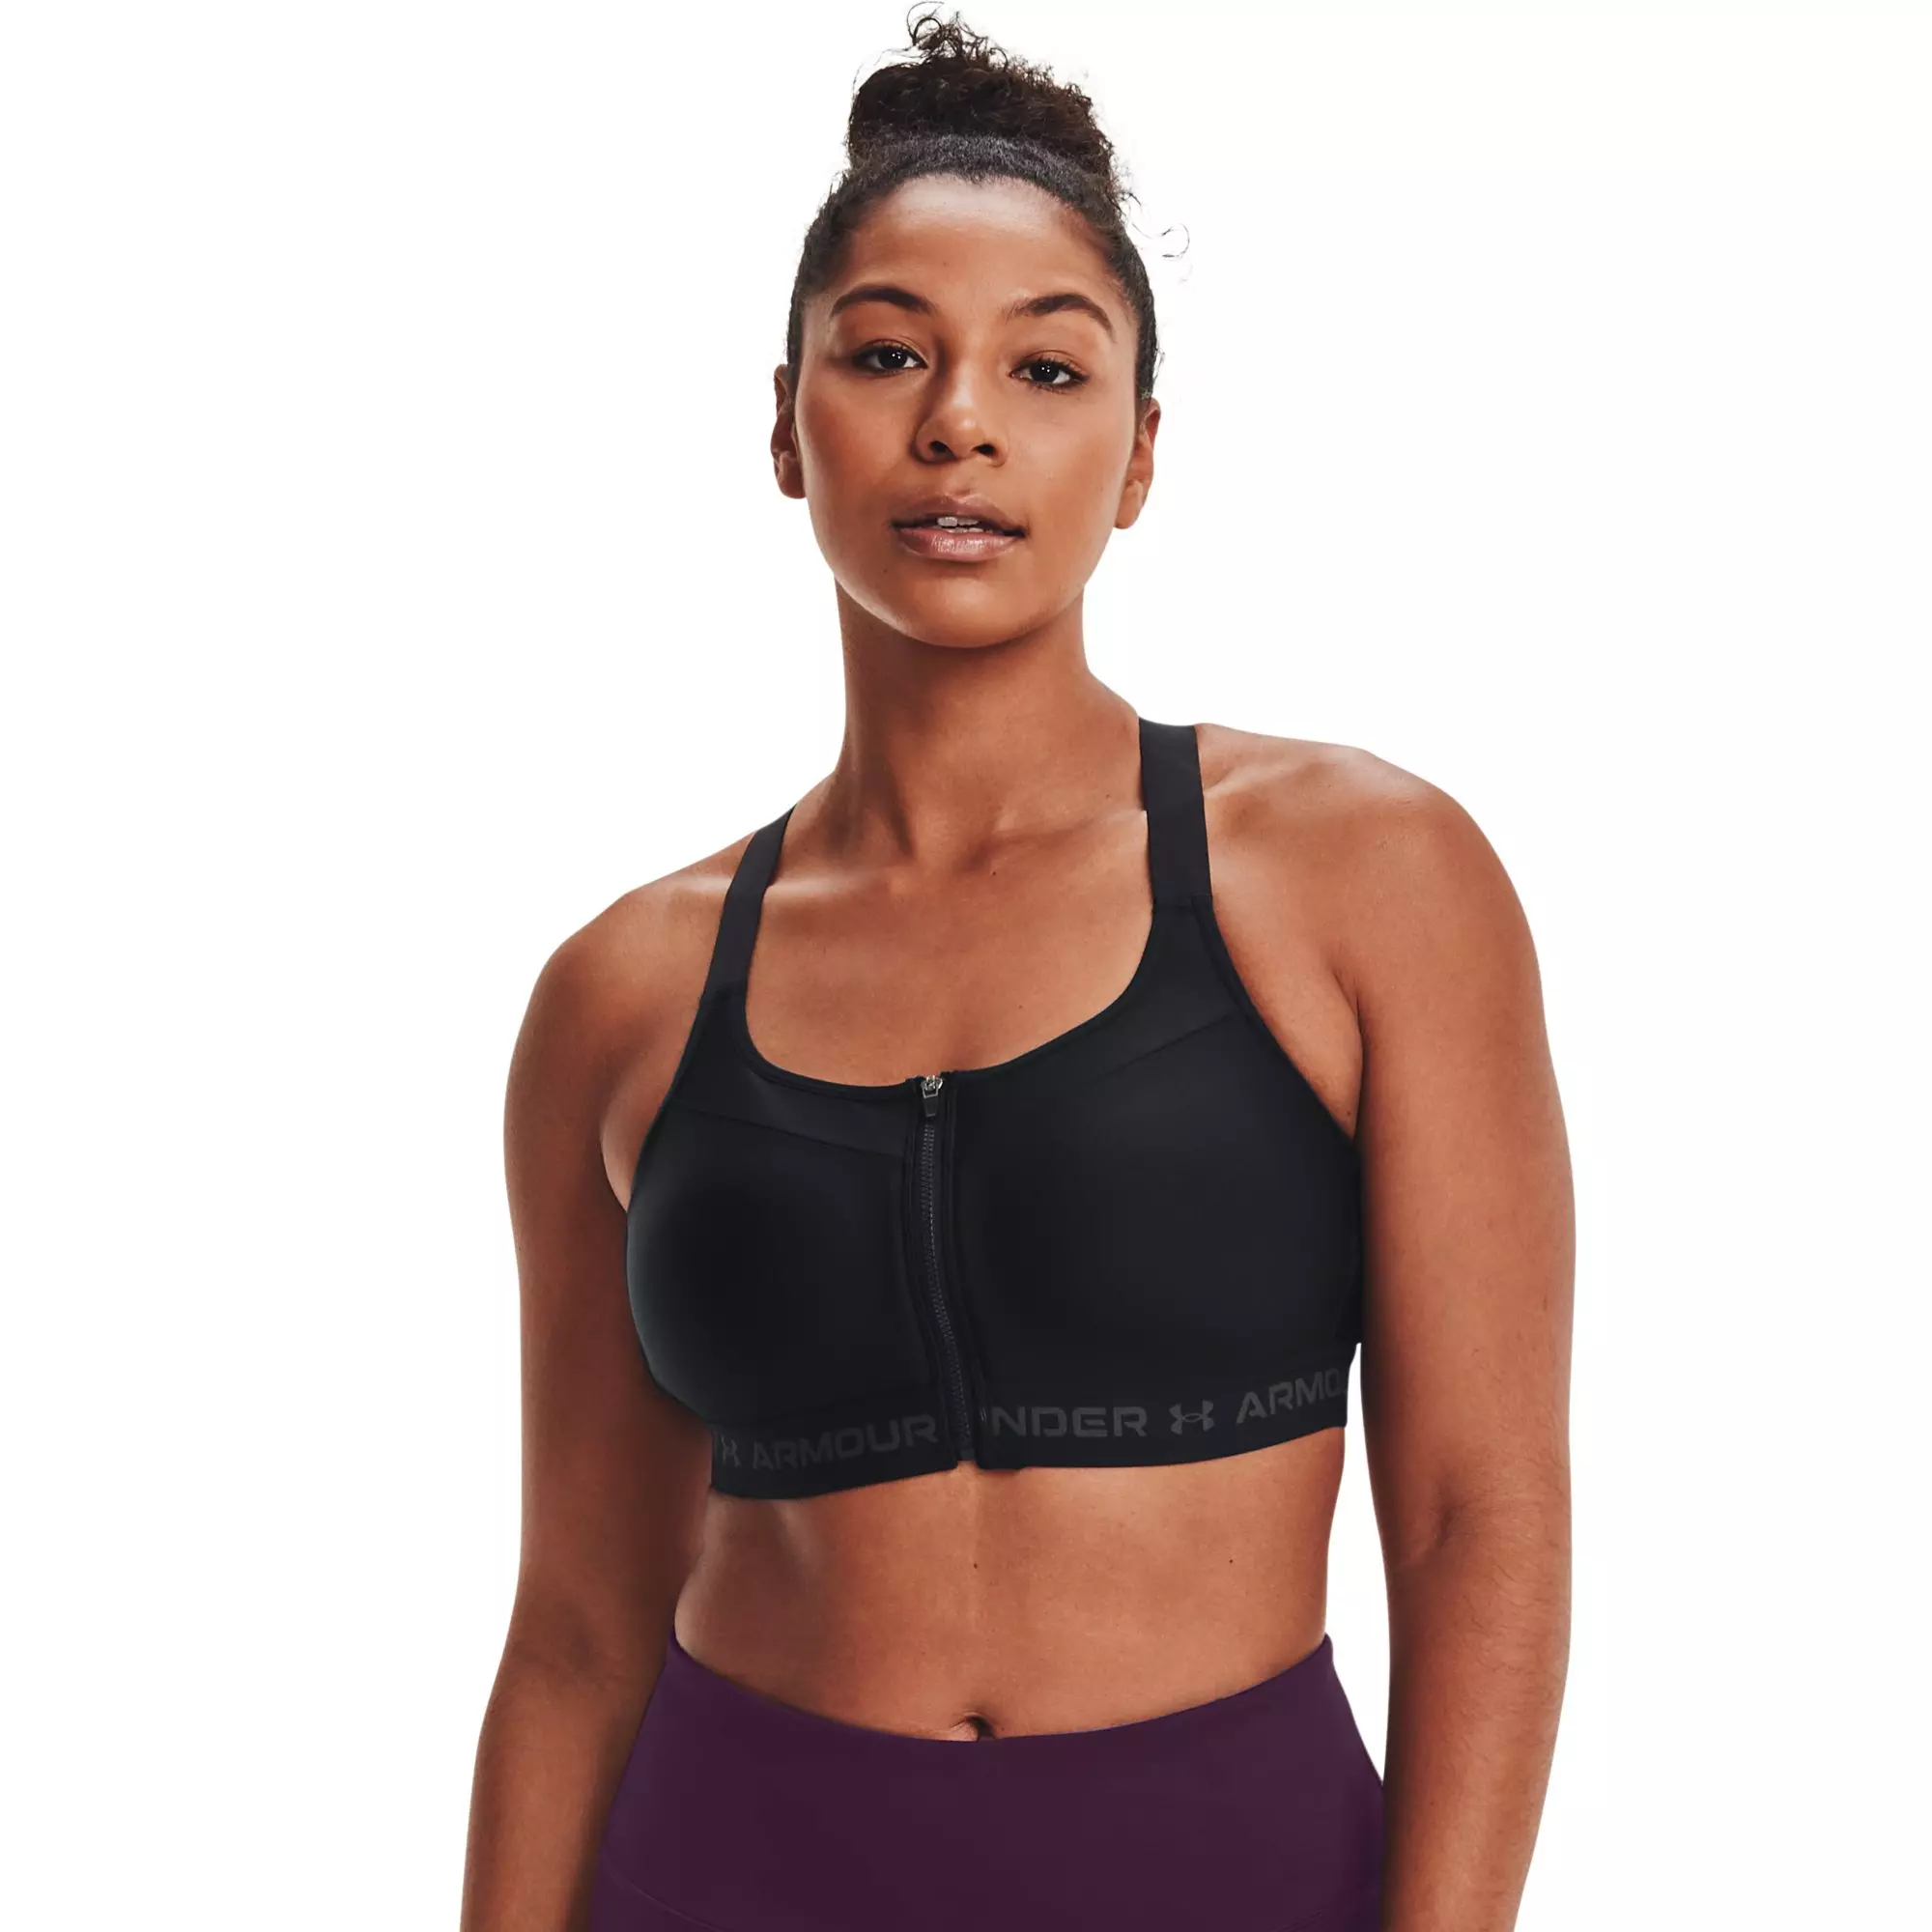 Armour High Crossback Zip Front Sports Bra